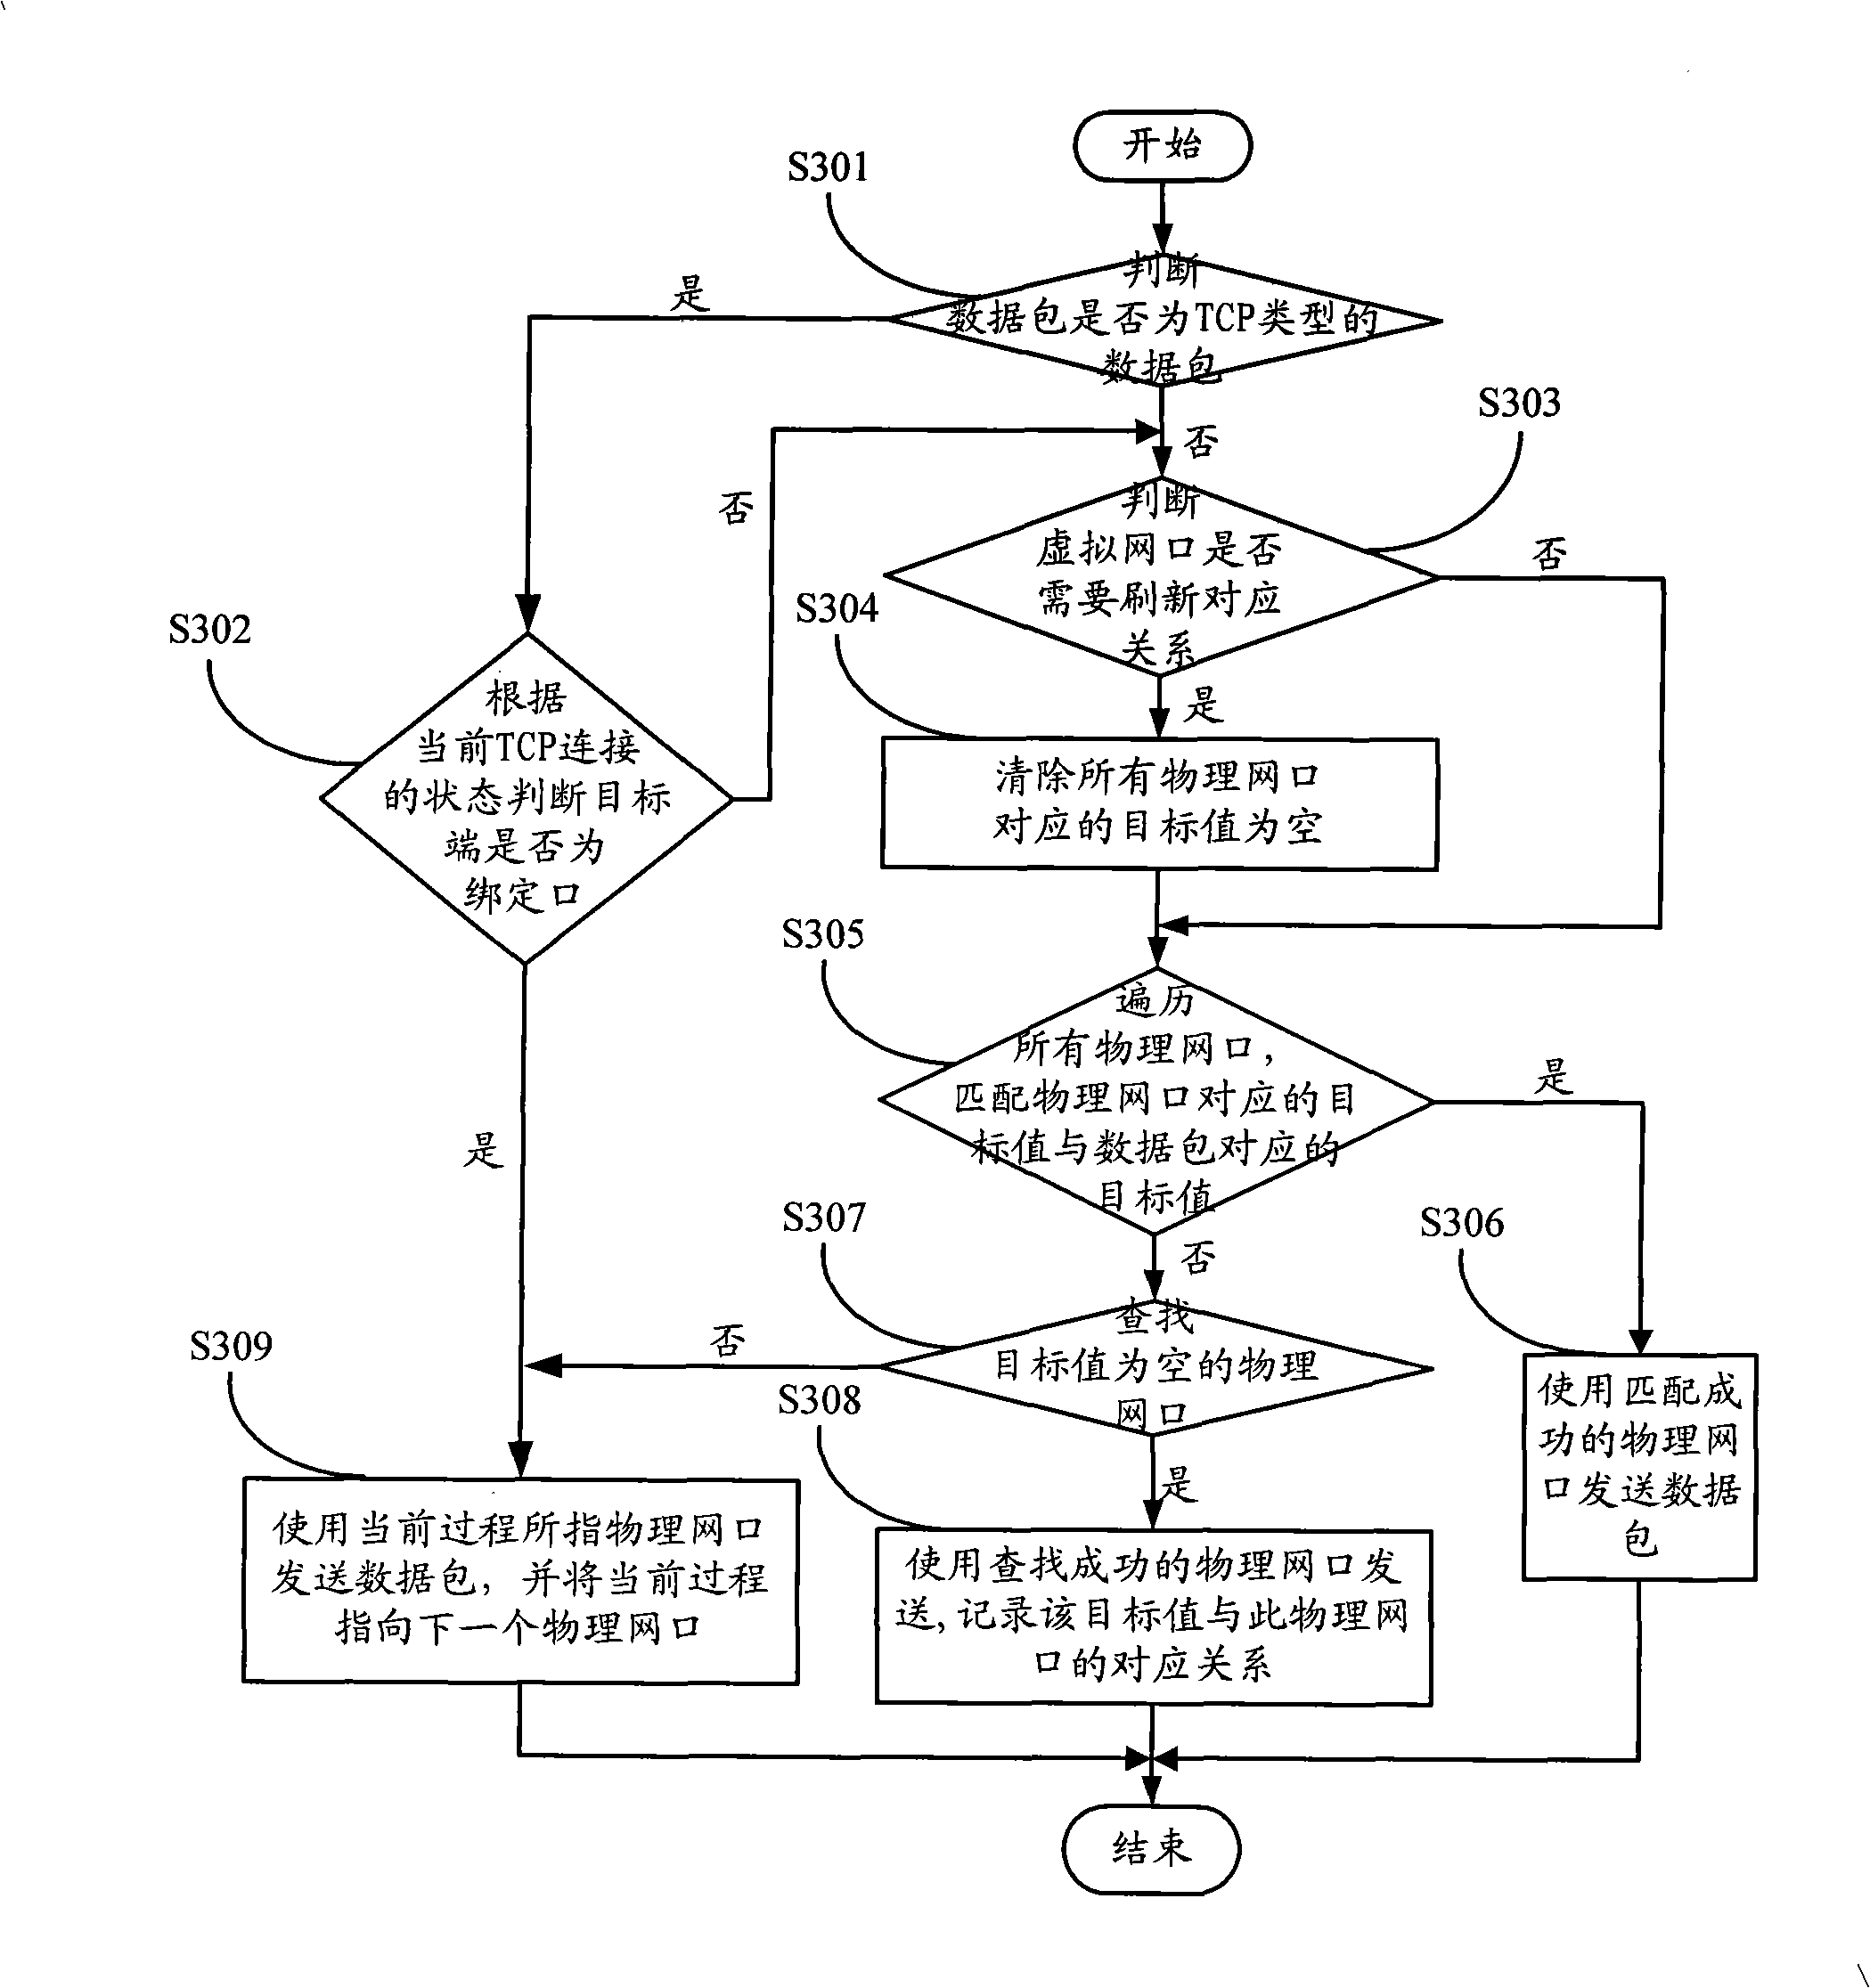 Method and equipment for transmitting data packet by multiple network ports